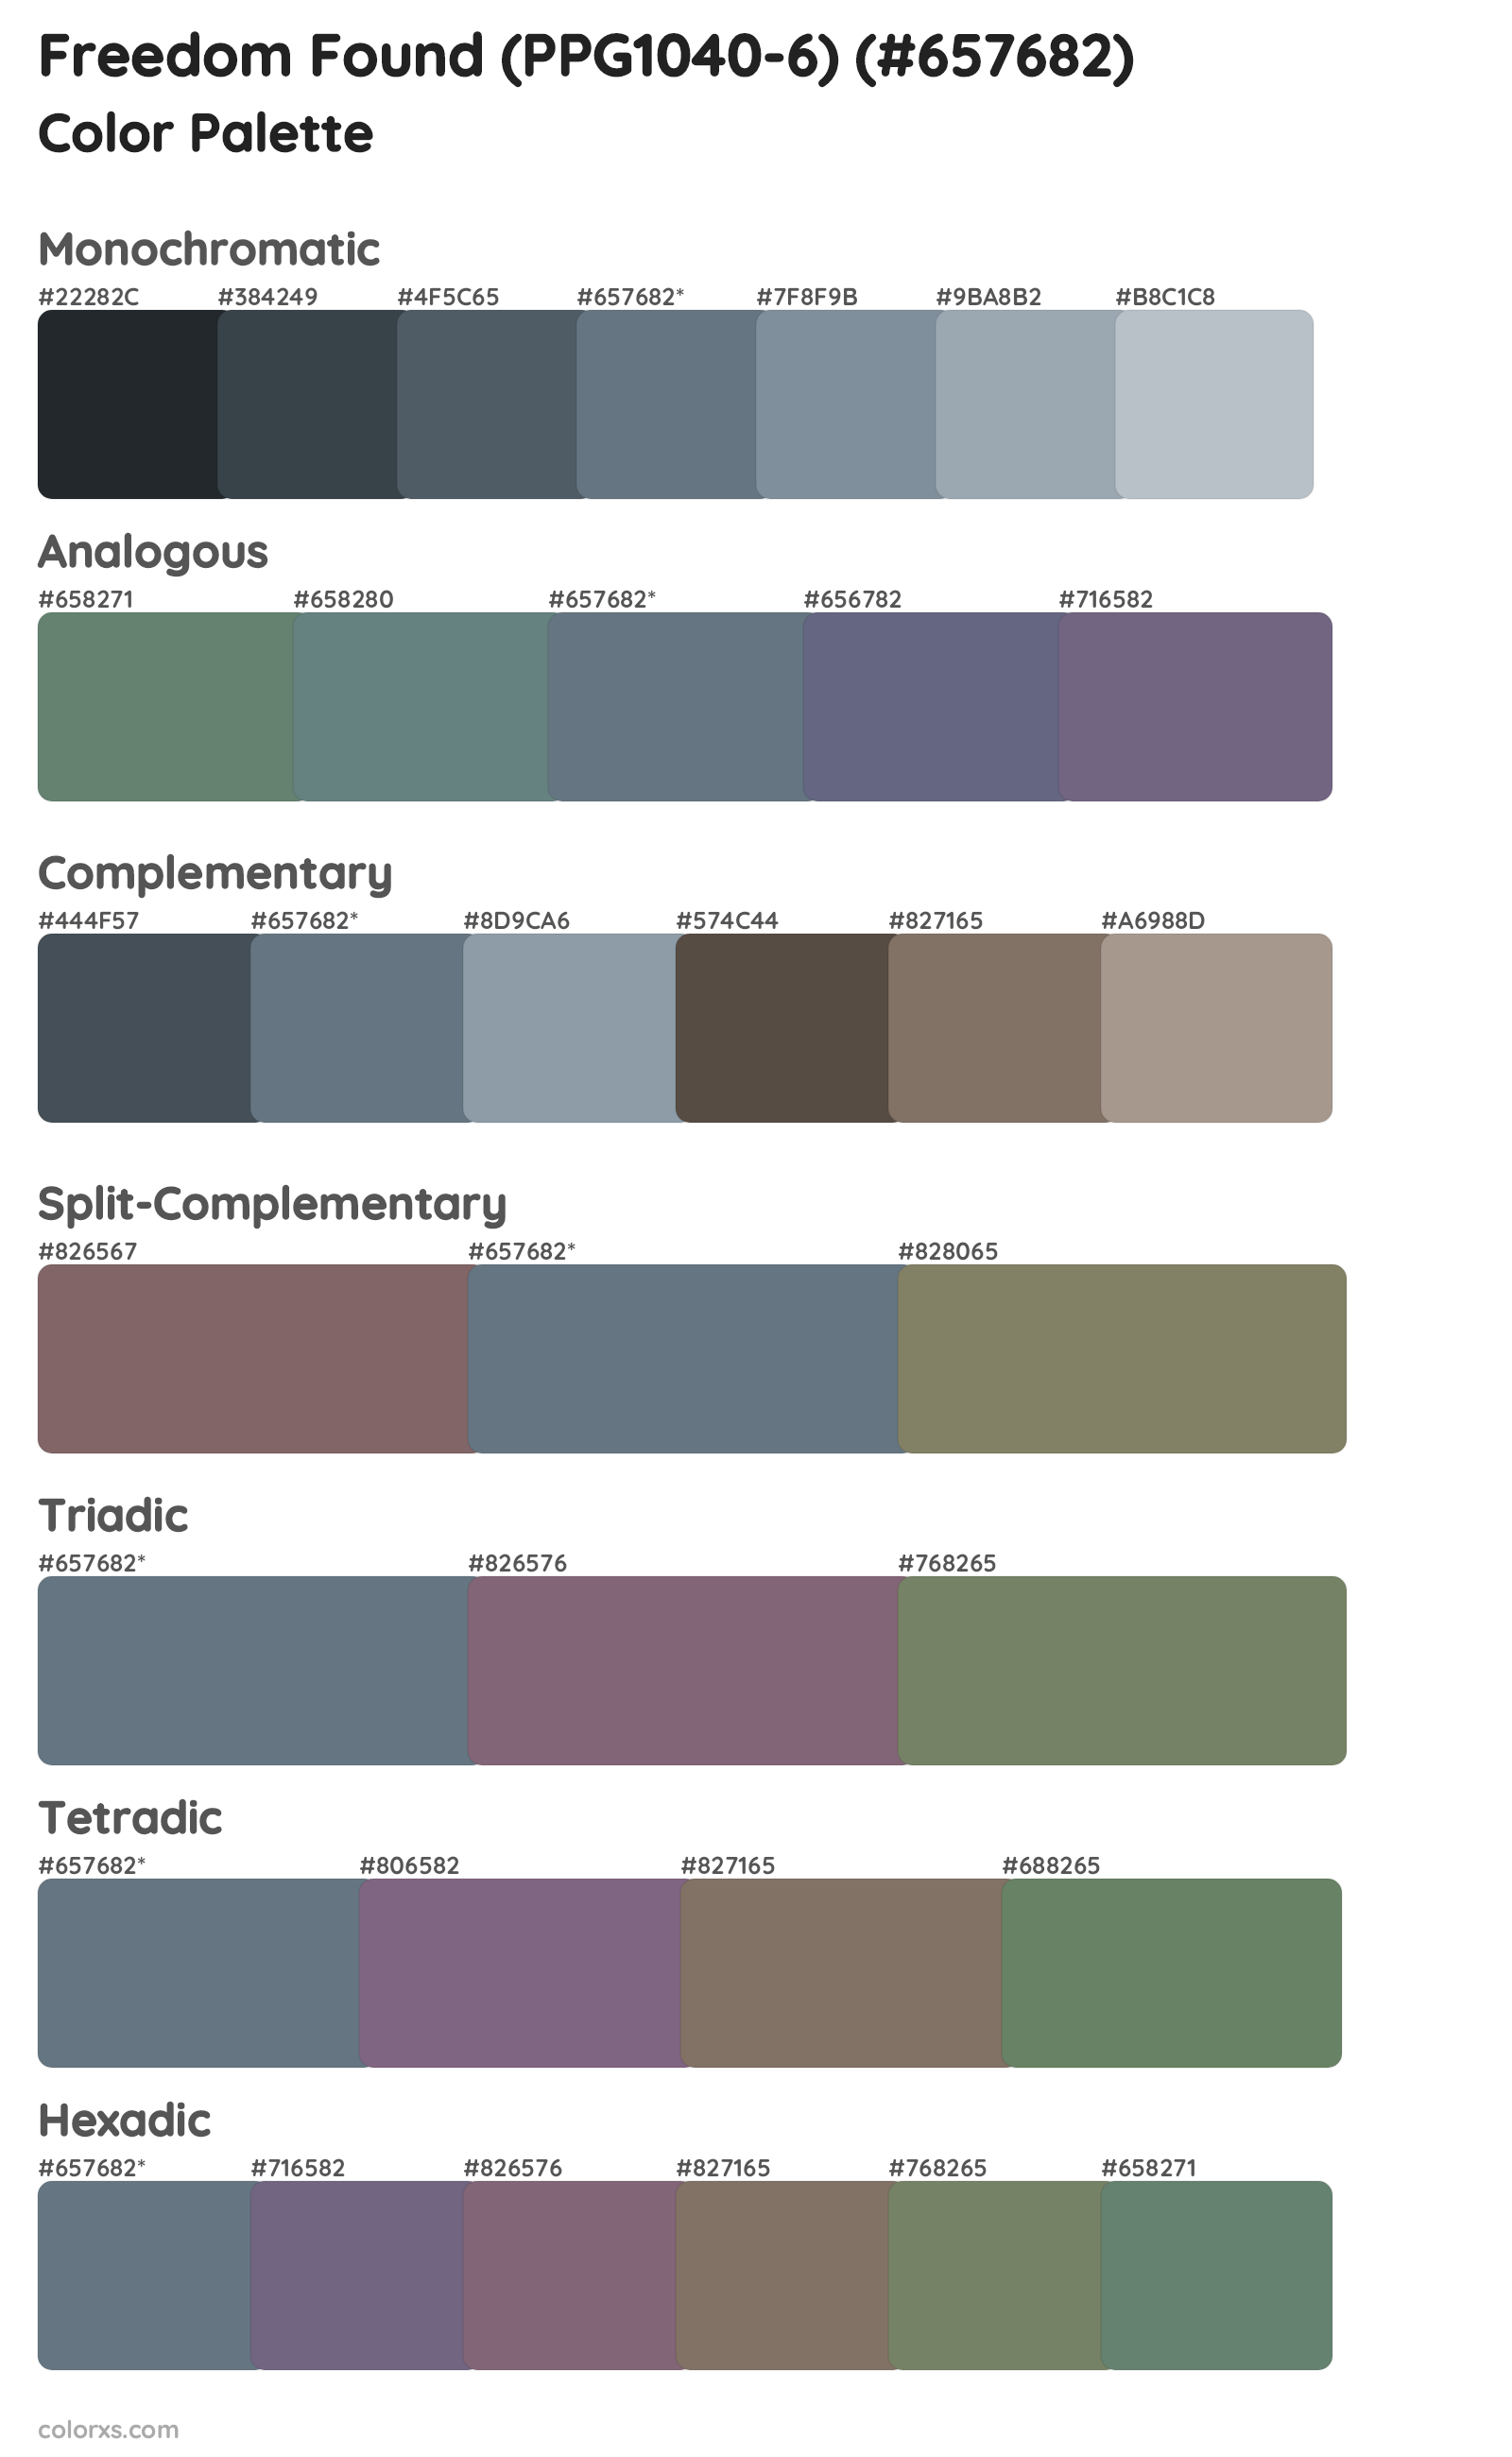 Freedom Found (PPG1040-6) Color Scheme Palettes